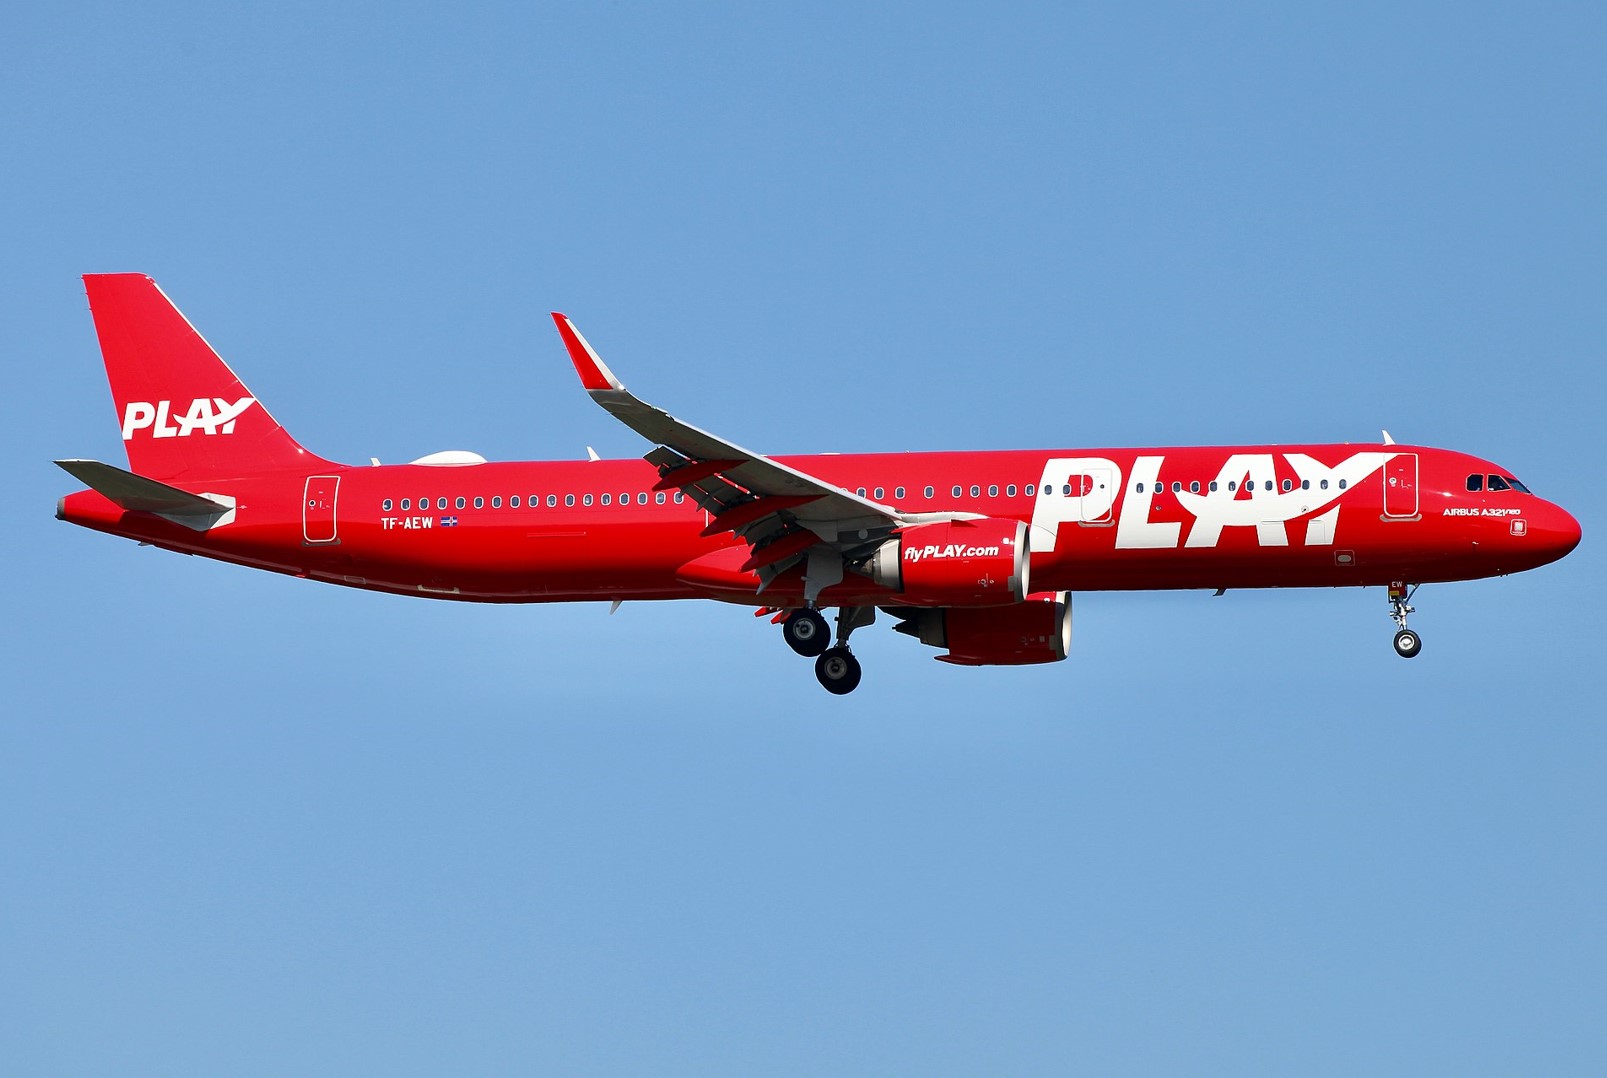 PLAY Airlines aircraft in the sky